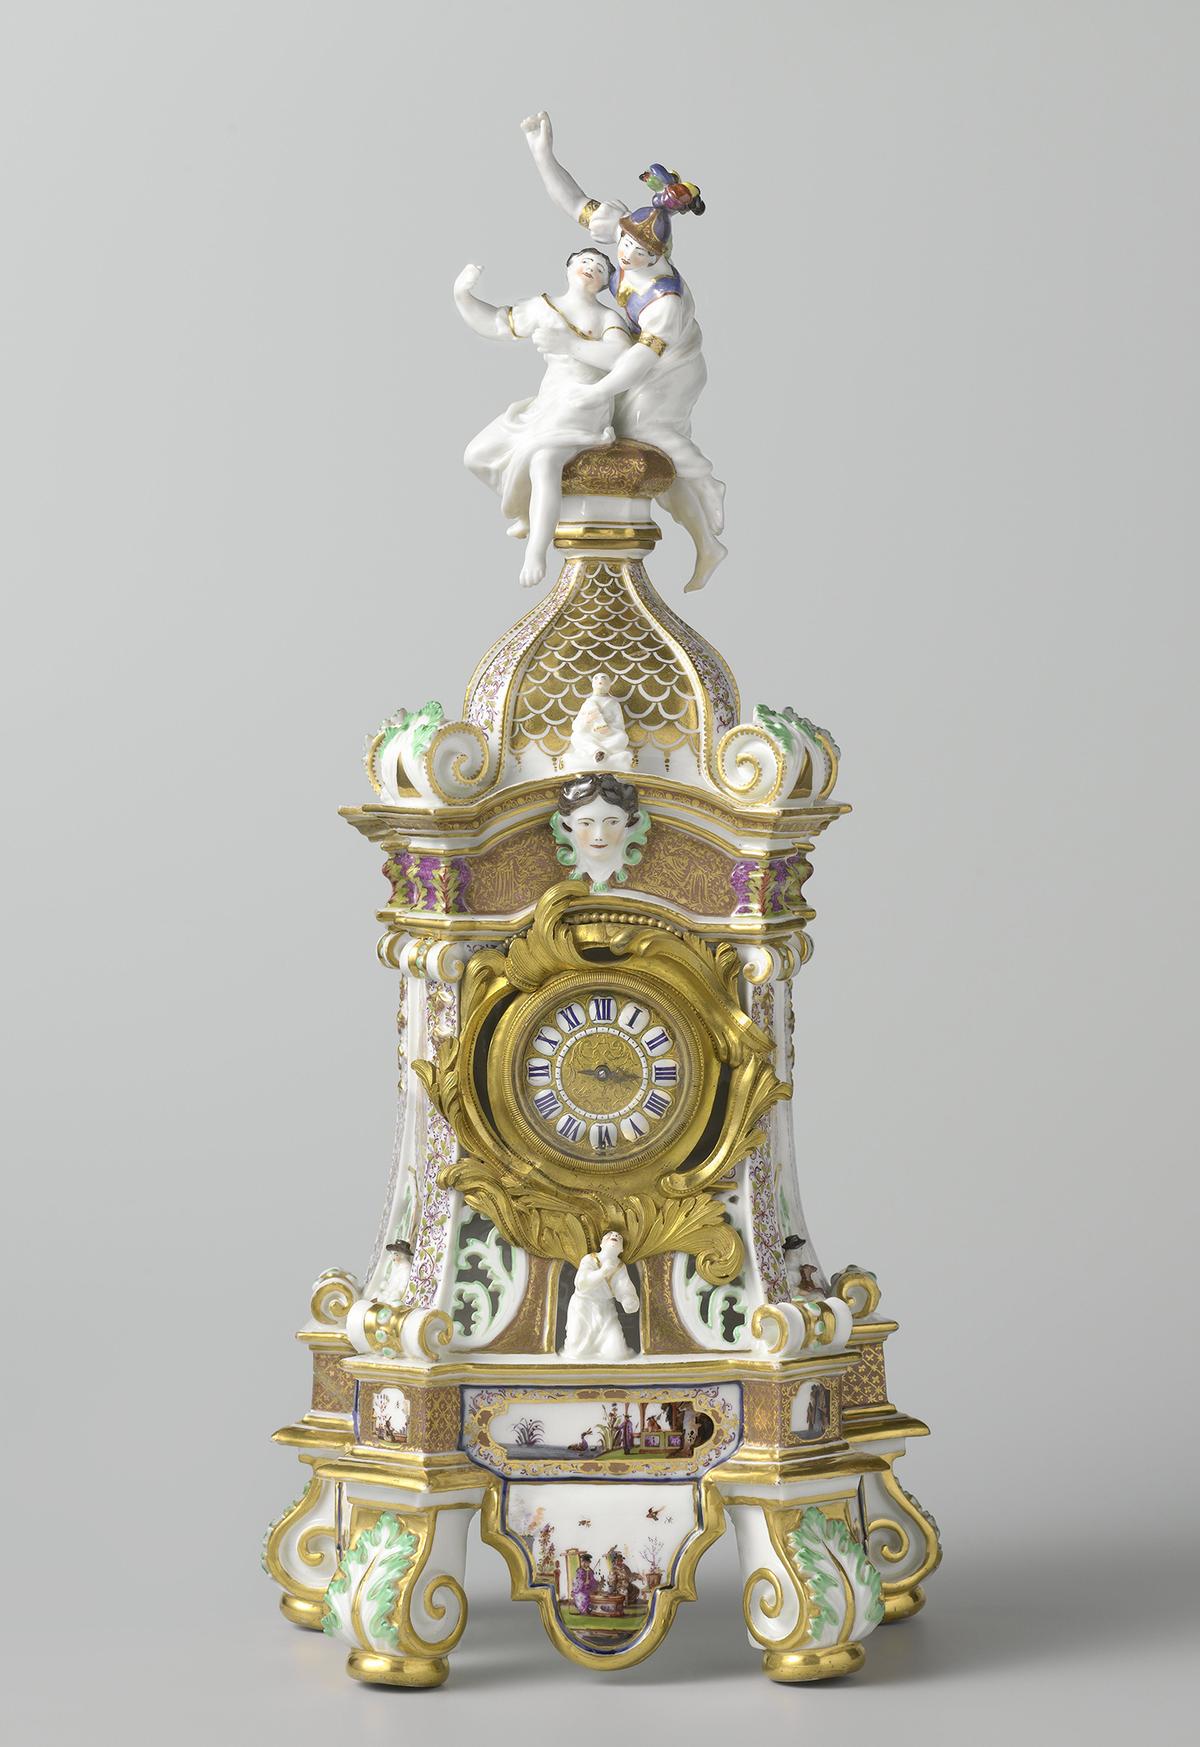 Mantel clock (pendule) with Arachne and Athena, 1727, attributed to Johann Gottlieb Kirchner from the Meissen Porcelain Manufactory. Porcelain with metal gilding; 17 3/10 inches by  8 1/5 inches by 5 3/10 inches. Rijksmuseum, Amsterdam. (Public Domain)